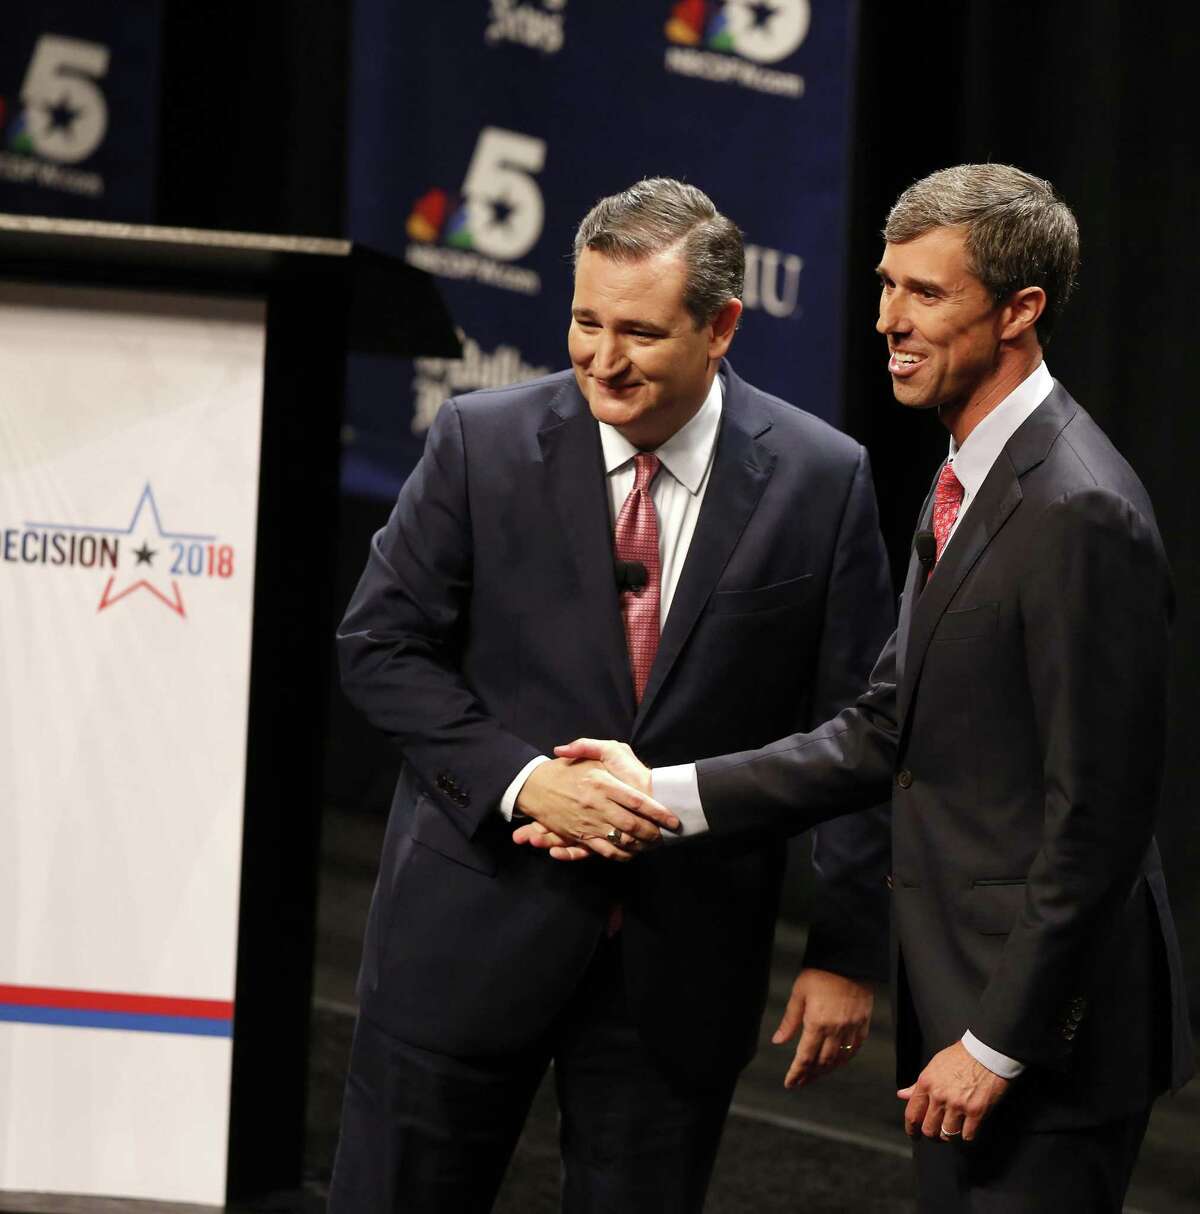 U.S. Sen. Ted Cruz, R-Texas, and Rep. Beto O'Rourke, D-Texas, appear after a debate at McFarlin Auditorium at Southern Methodist University in Dallas on Friday, Sept. 21, 2018.